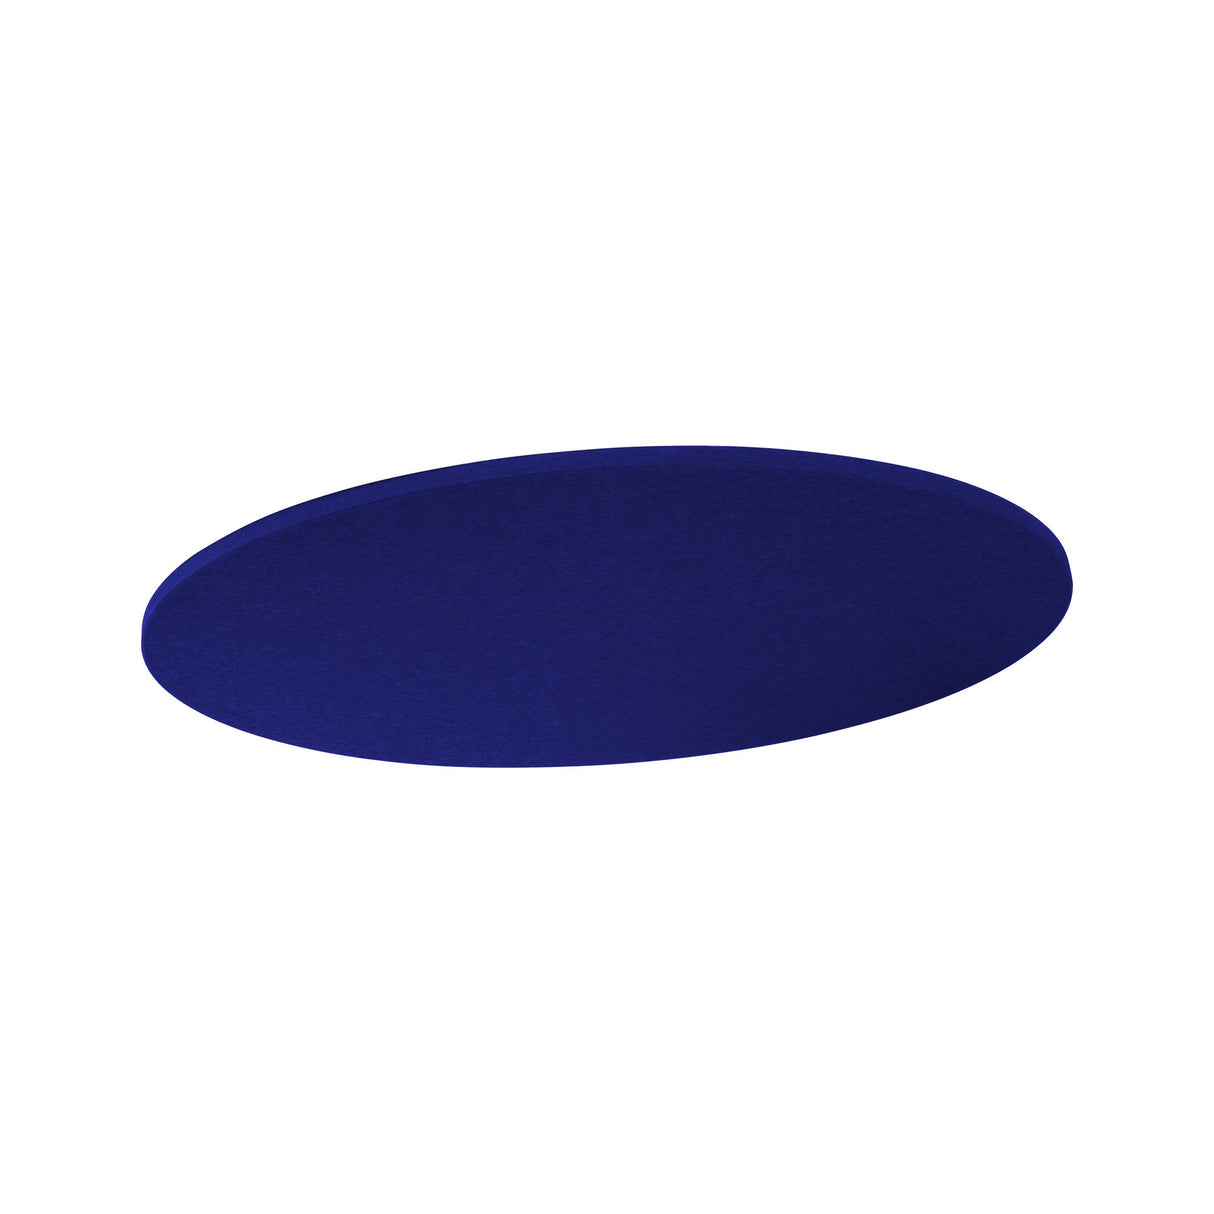 Primacoustic EcoScapes Round Cloud 4-Foot Micro-Beveled Edge Wall Panel, Cobalt 2-Pack